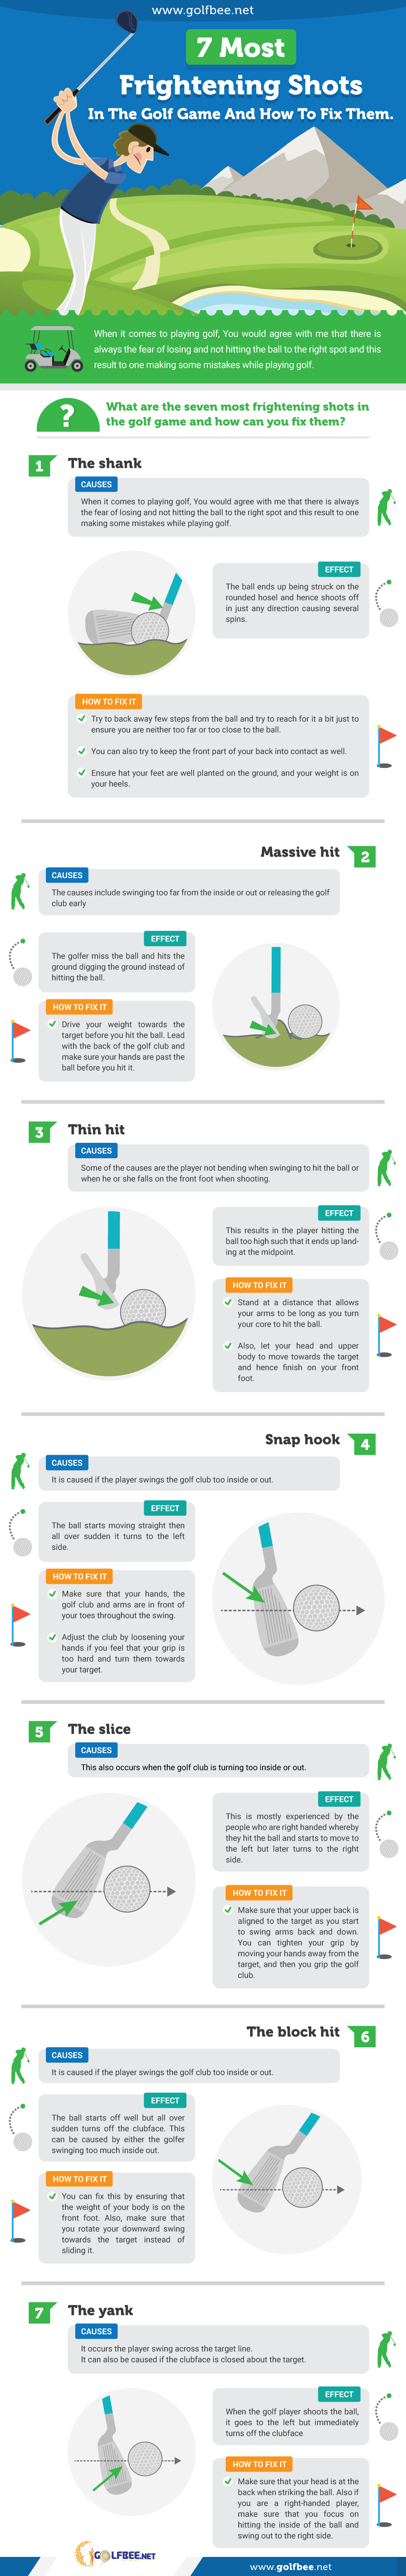 7 Most Frightening Shots In The Golf Game And How To Fix Them